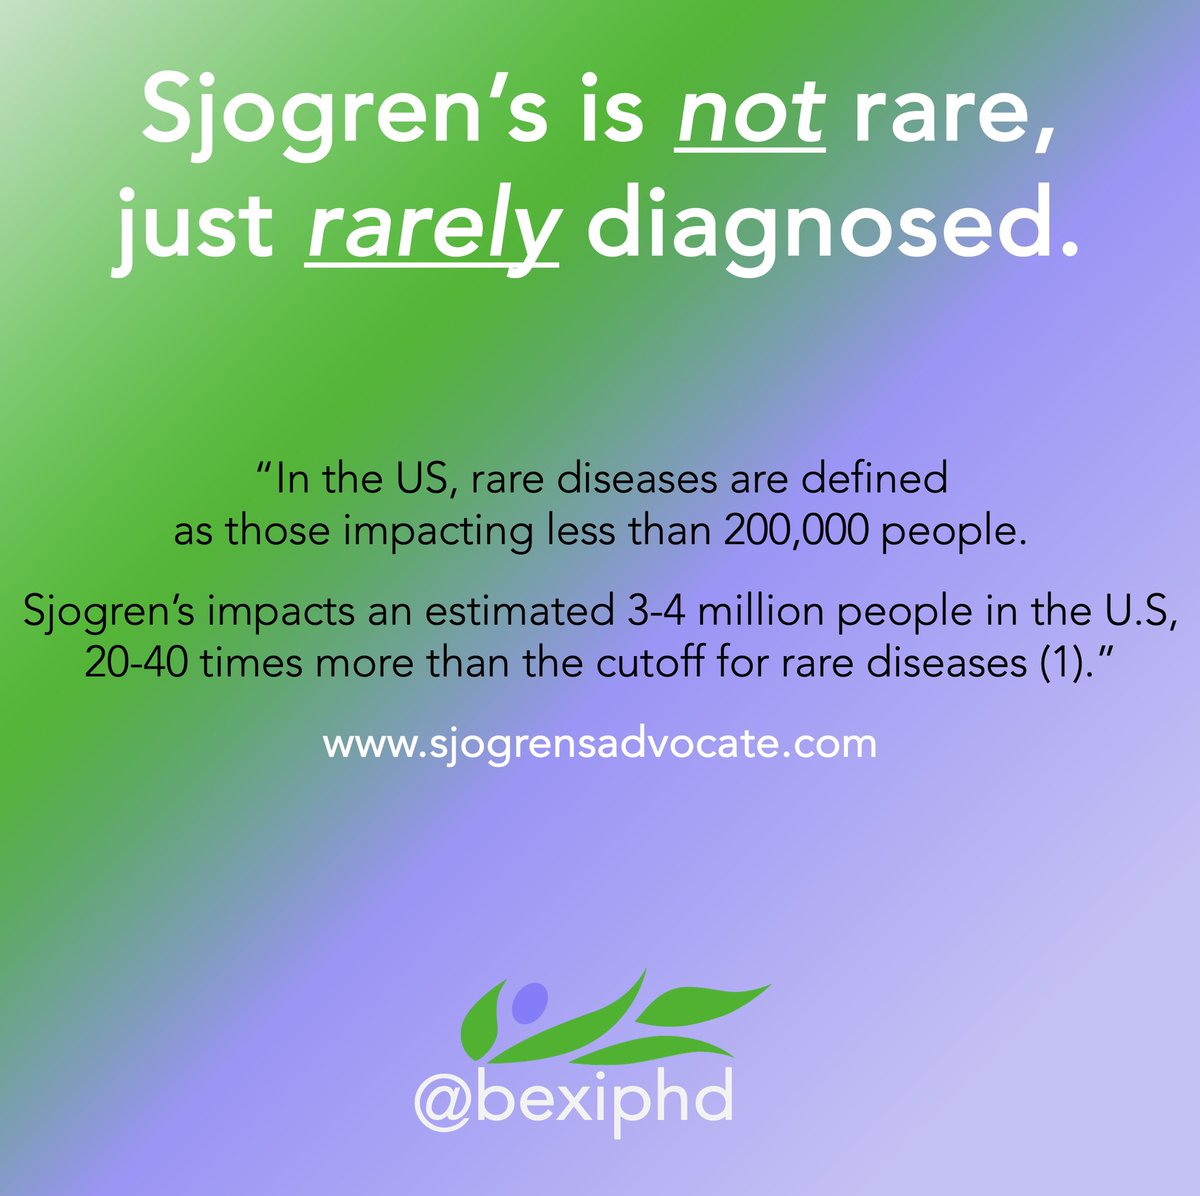 April is Sjogren's awareness month. There are lots of myths about Sjogren's in the medical community and public that are barriers to diagnosis and care. Please help me advocate for Sjogren's this month by interacting with, commenting on, and sharing my posts.